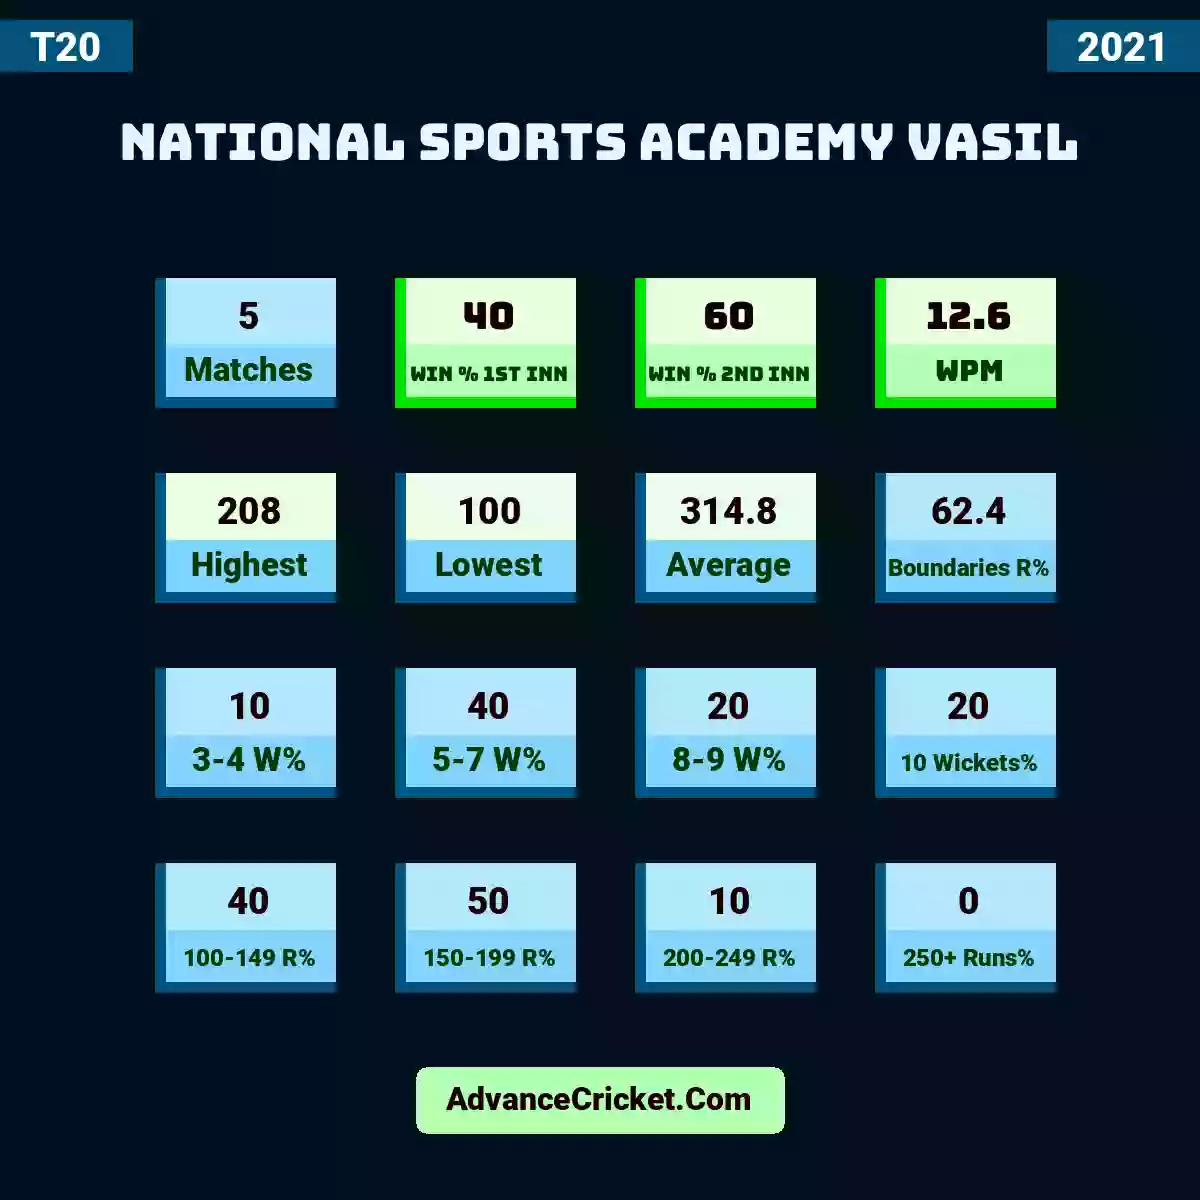 Image showing National Sports Academy Vasil with Matches: 5, Win % 1st Inn: 40, Win % 2nd Inn: 60, WPM: 12.6, Highest: 208, Lowest: 100, Average: 314.8, Boundaries R%: 62.4, 3-4 W%: 10, 5-7 W%: 40, 8-9 W%: 20, 10 Wickets%: 20, 100-149 R%: 40, 150-199 R%: 50, 200-249 R%: 10, 250+ Runs%: 0.